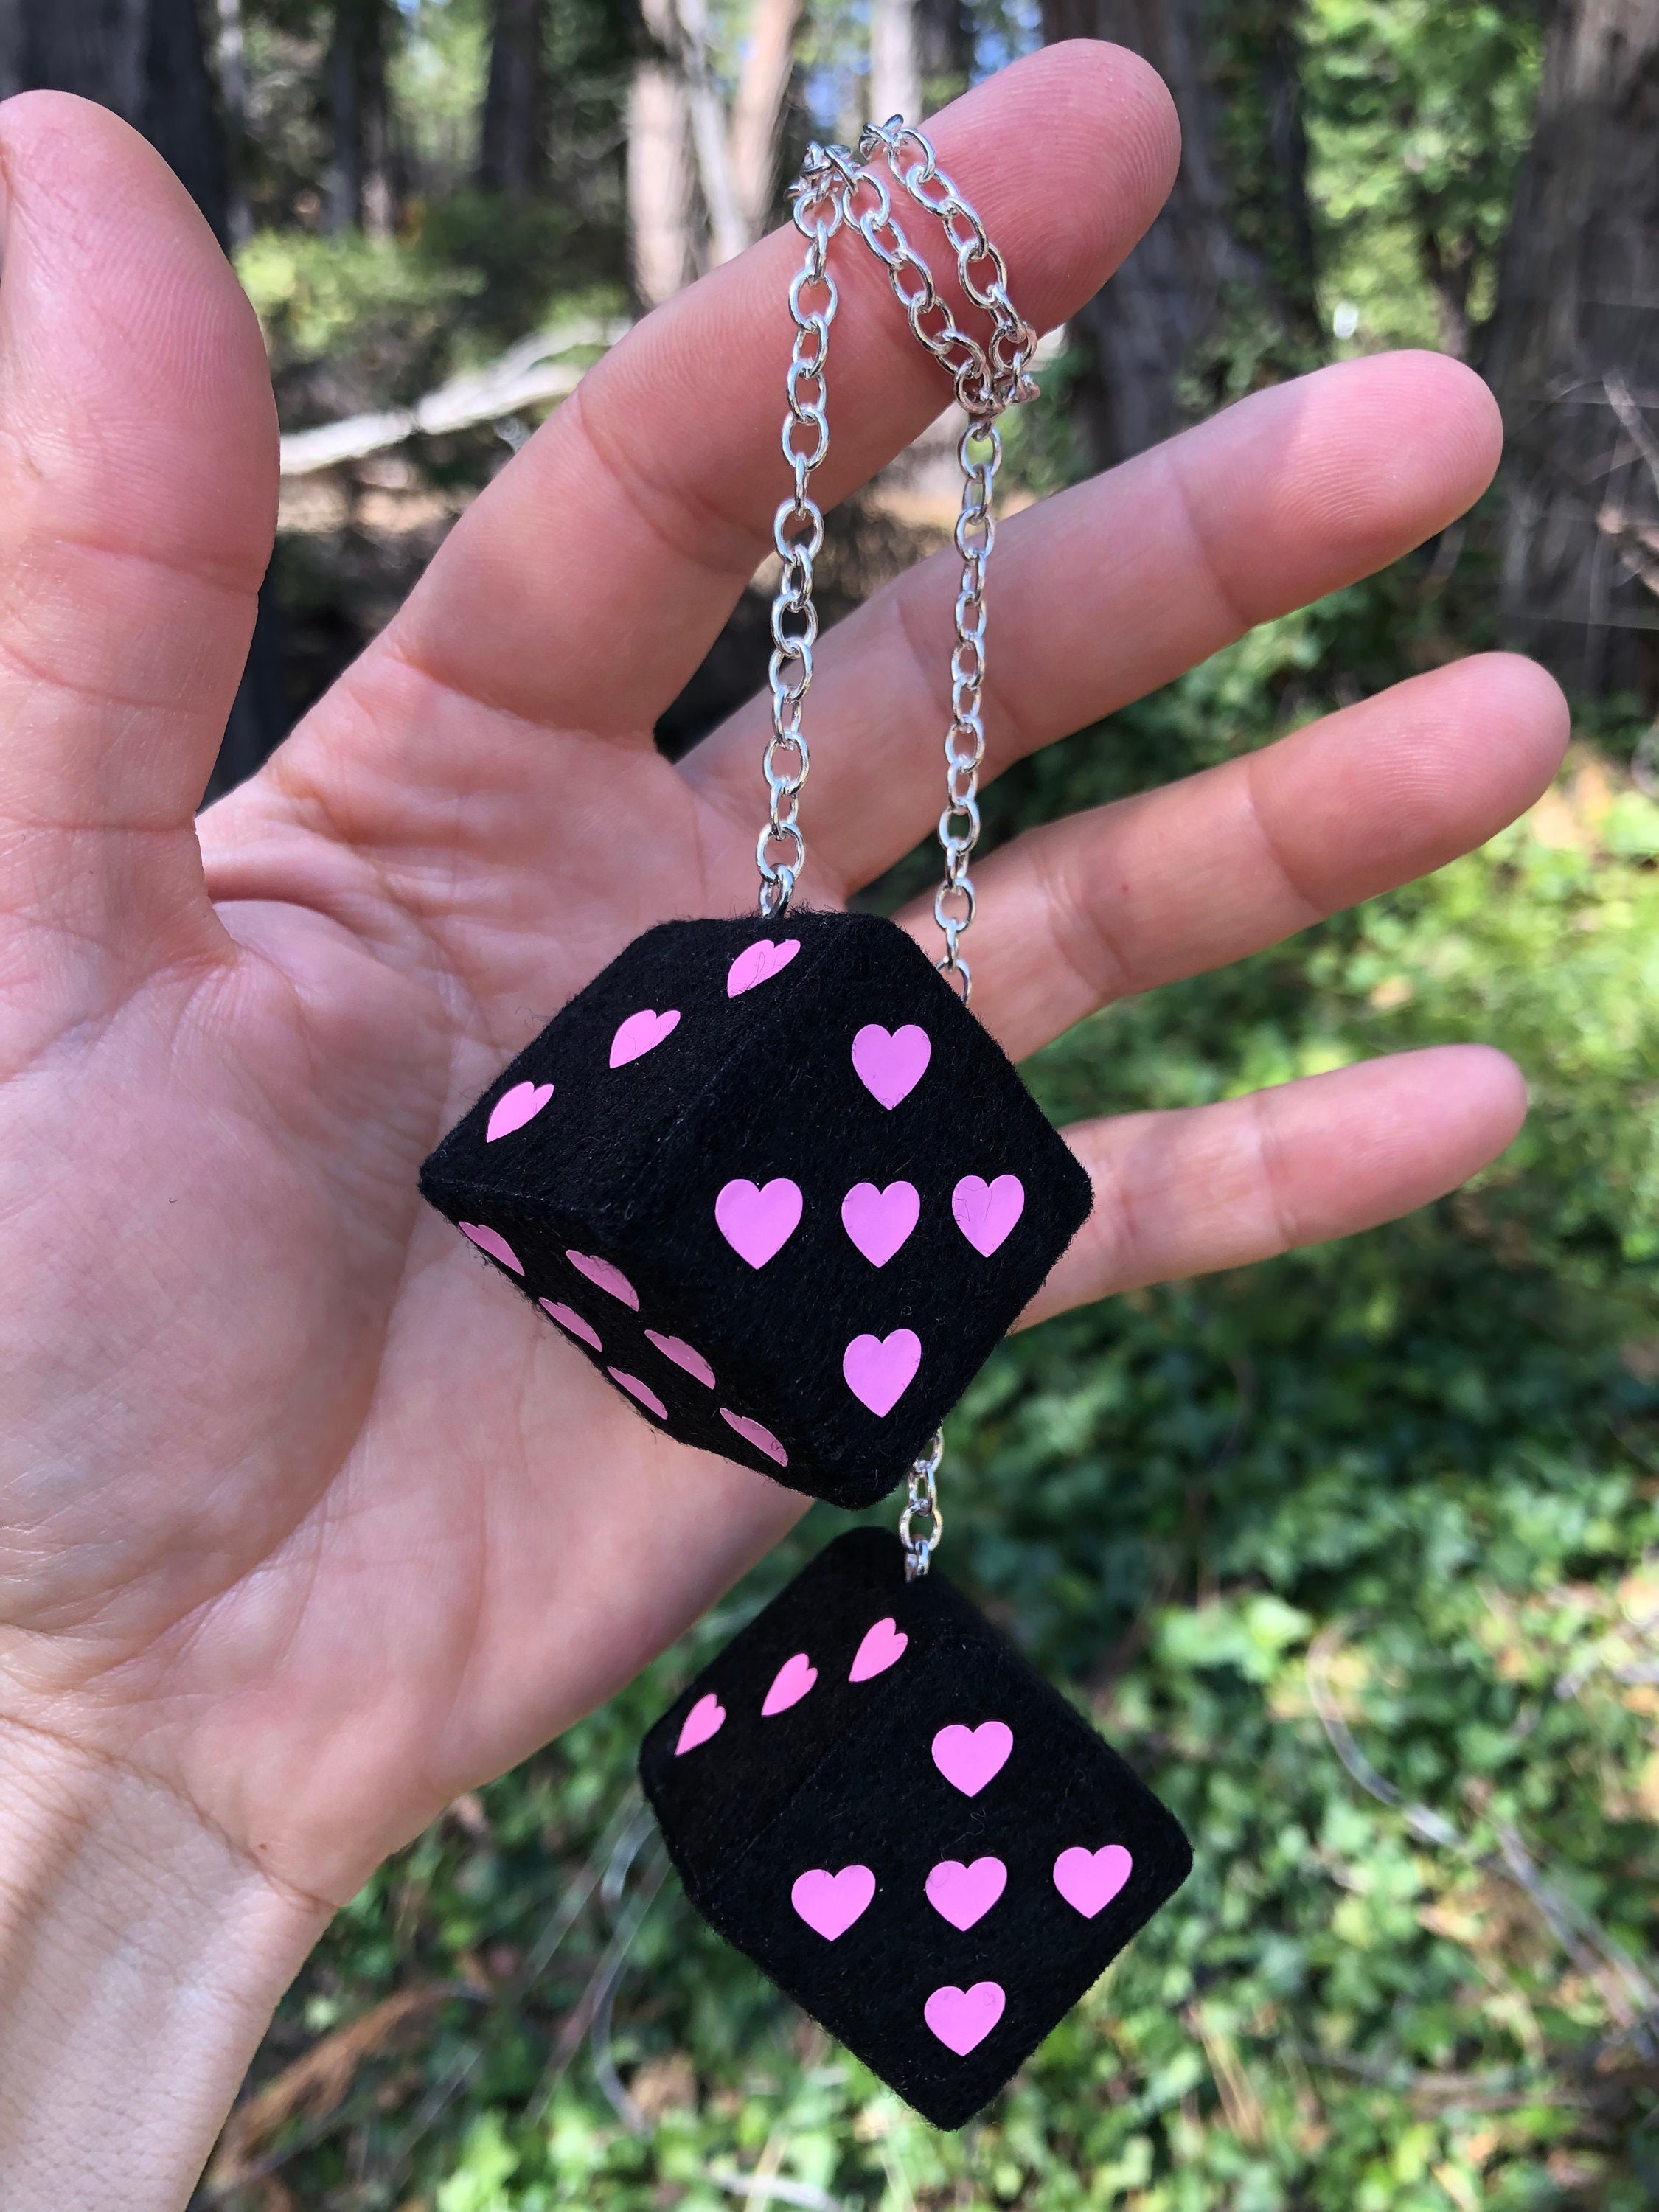 Black Fuzzy Dice With Pink Hearts and Chain or Cord / Car Accessories,  Charms, Gift, Novelty, Mirror Danglers, Car Dice, Car Charm 